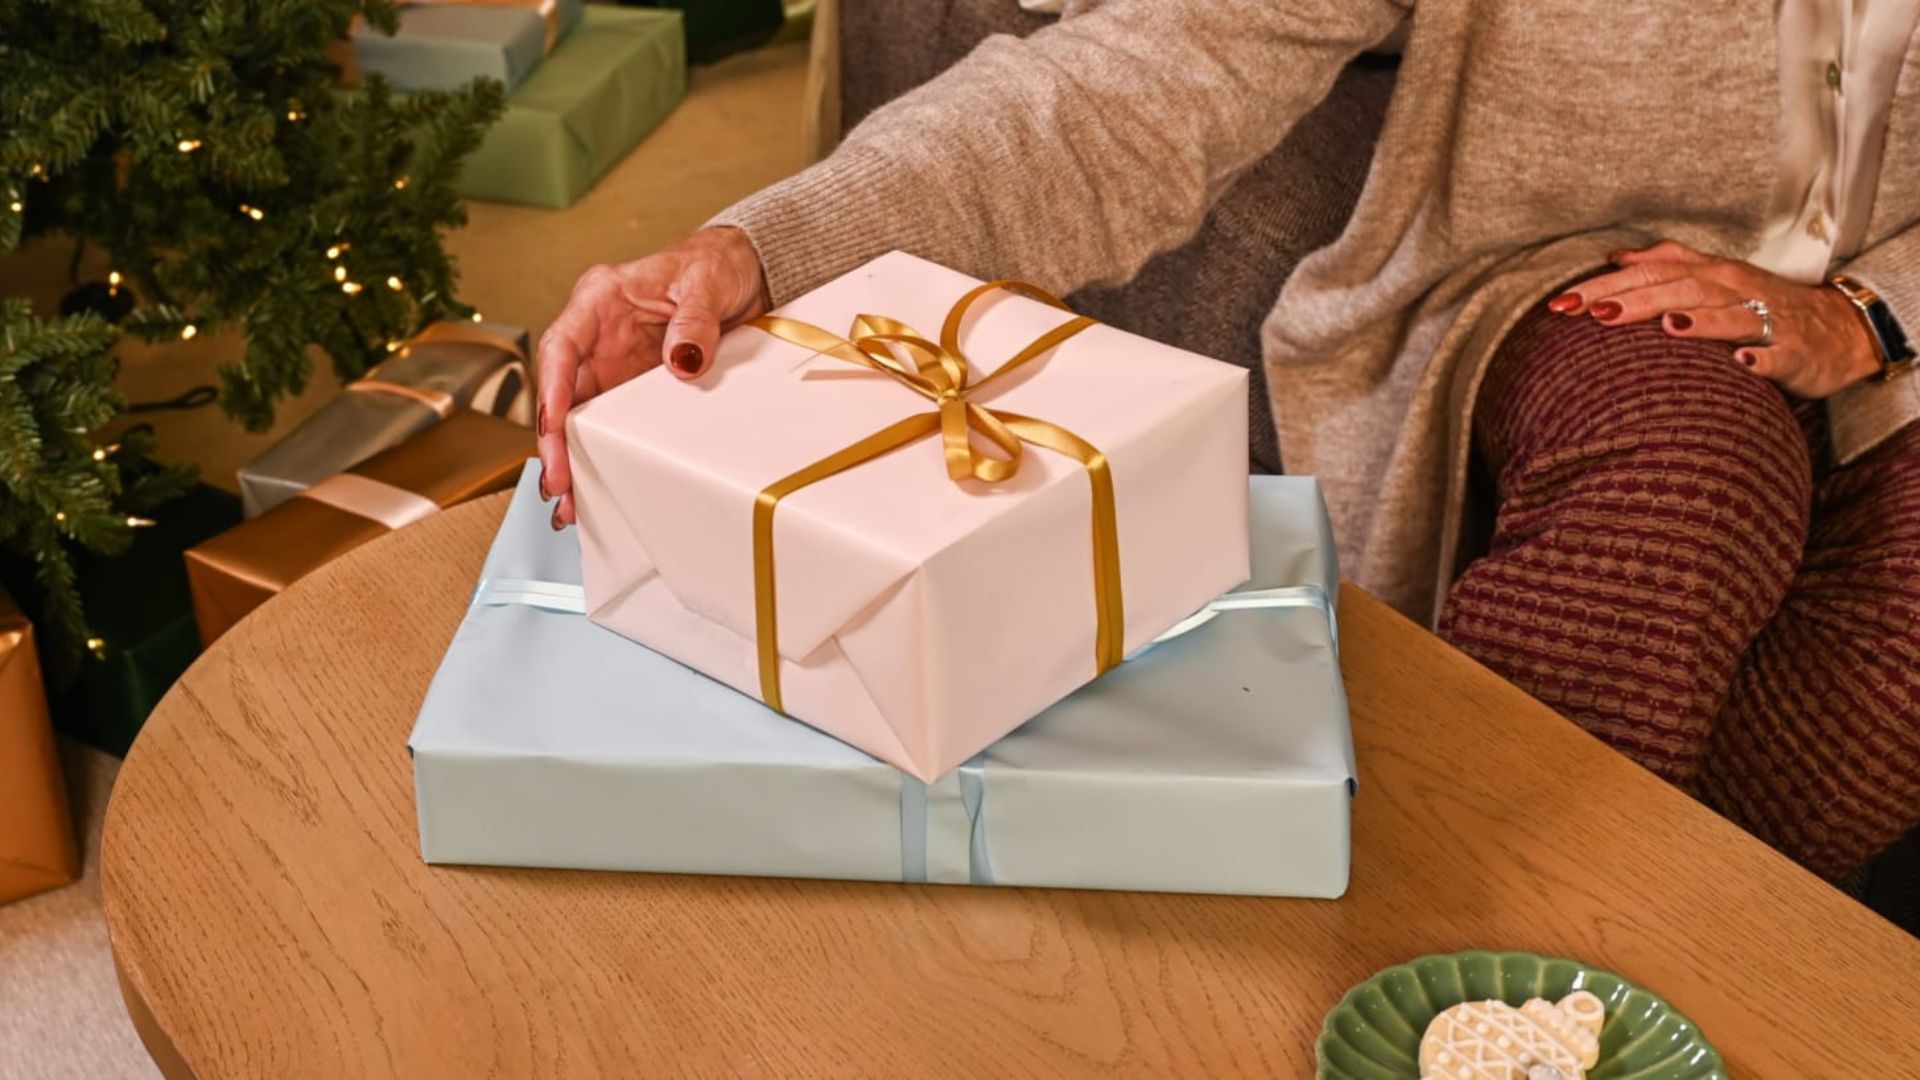 a women sitting while holding a box of gift showing one of the best gifts for men